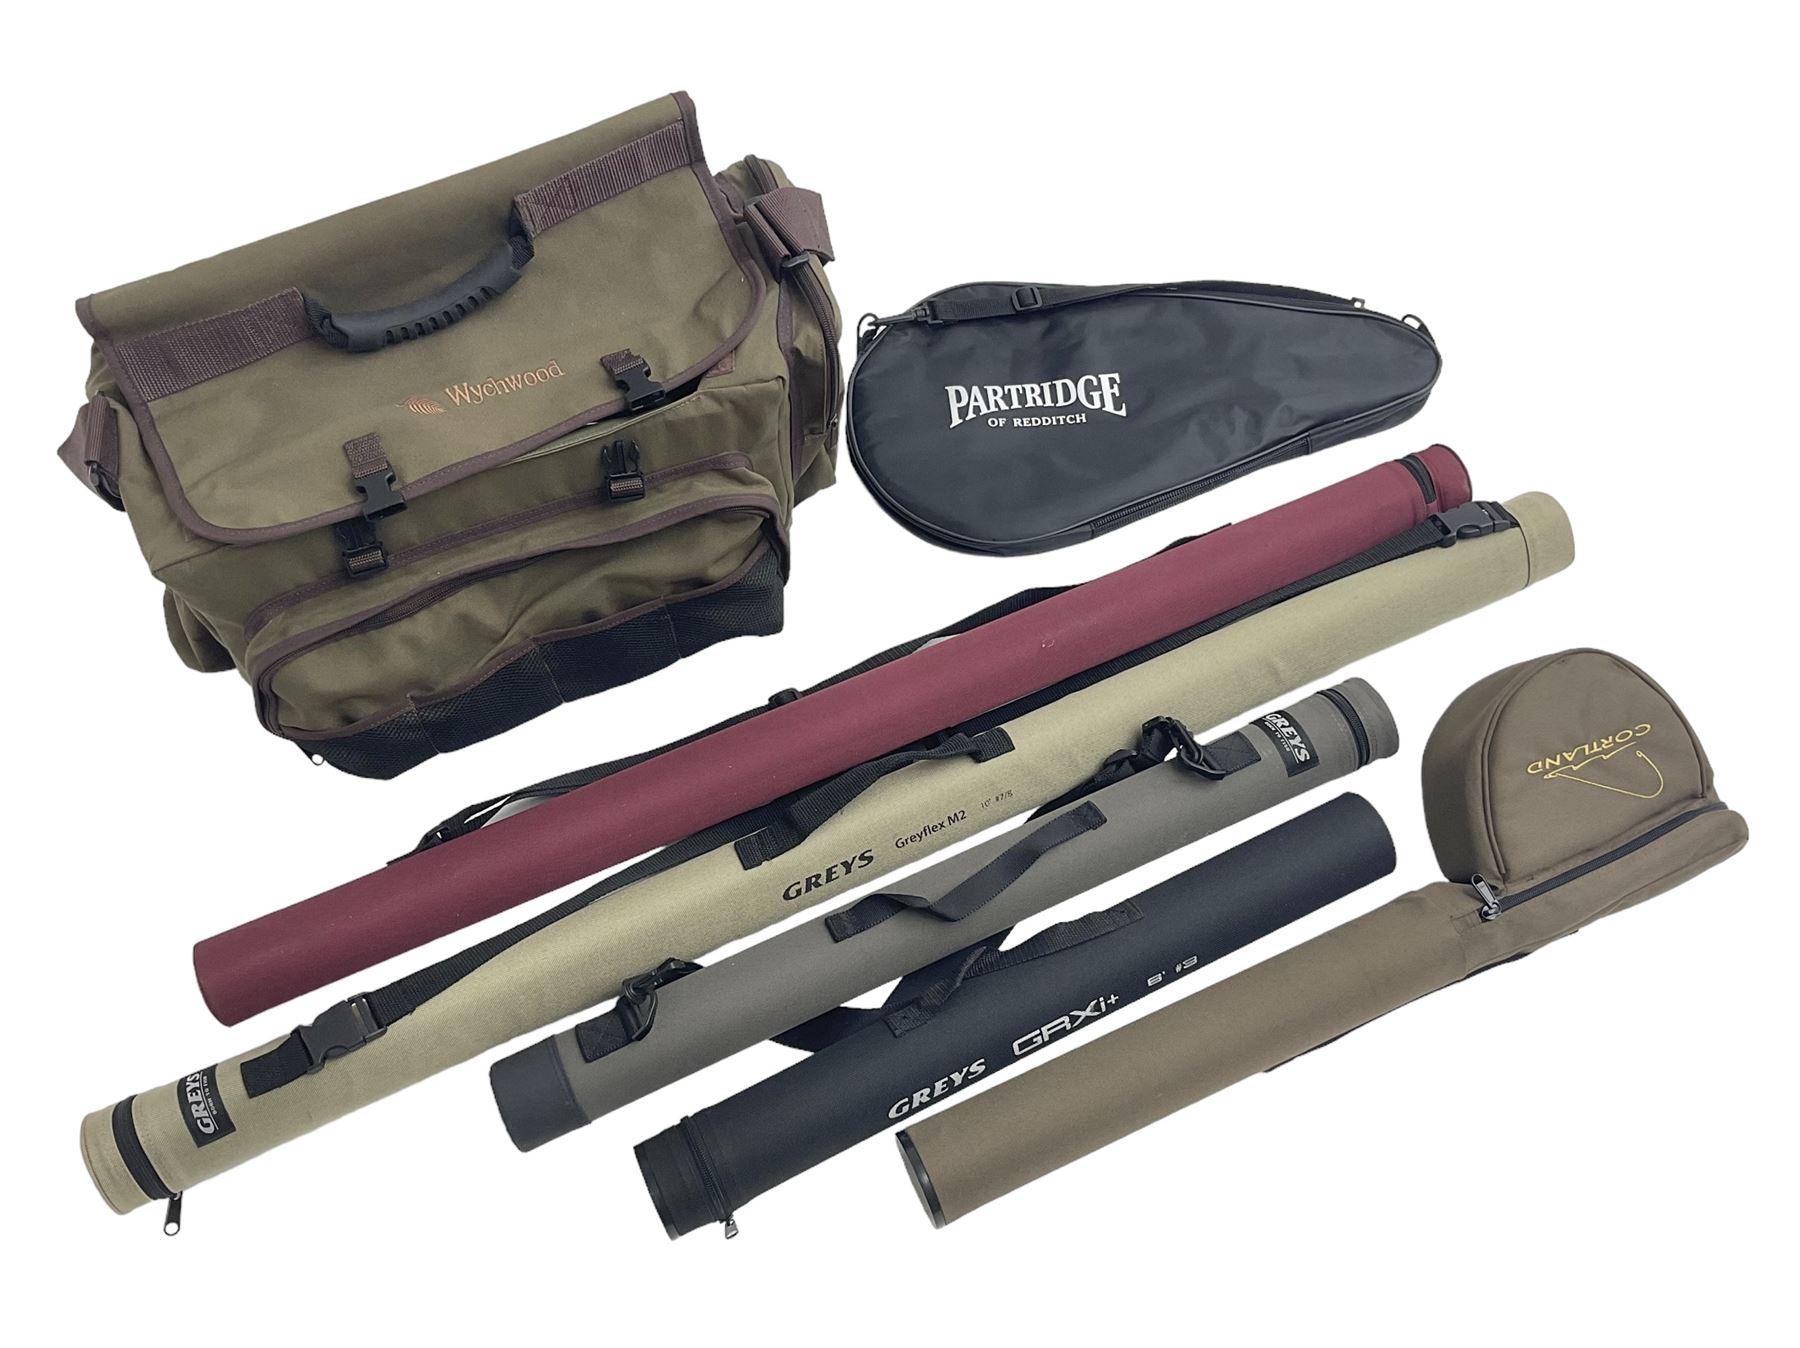 Five fly fishing rods, to include Greys Greyflex M2, Greys